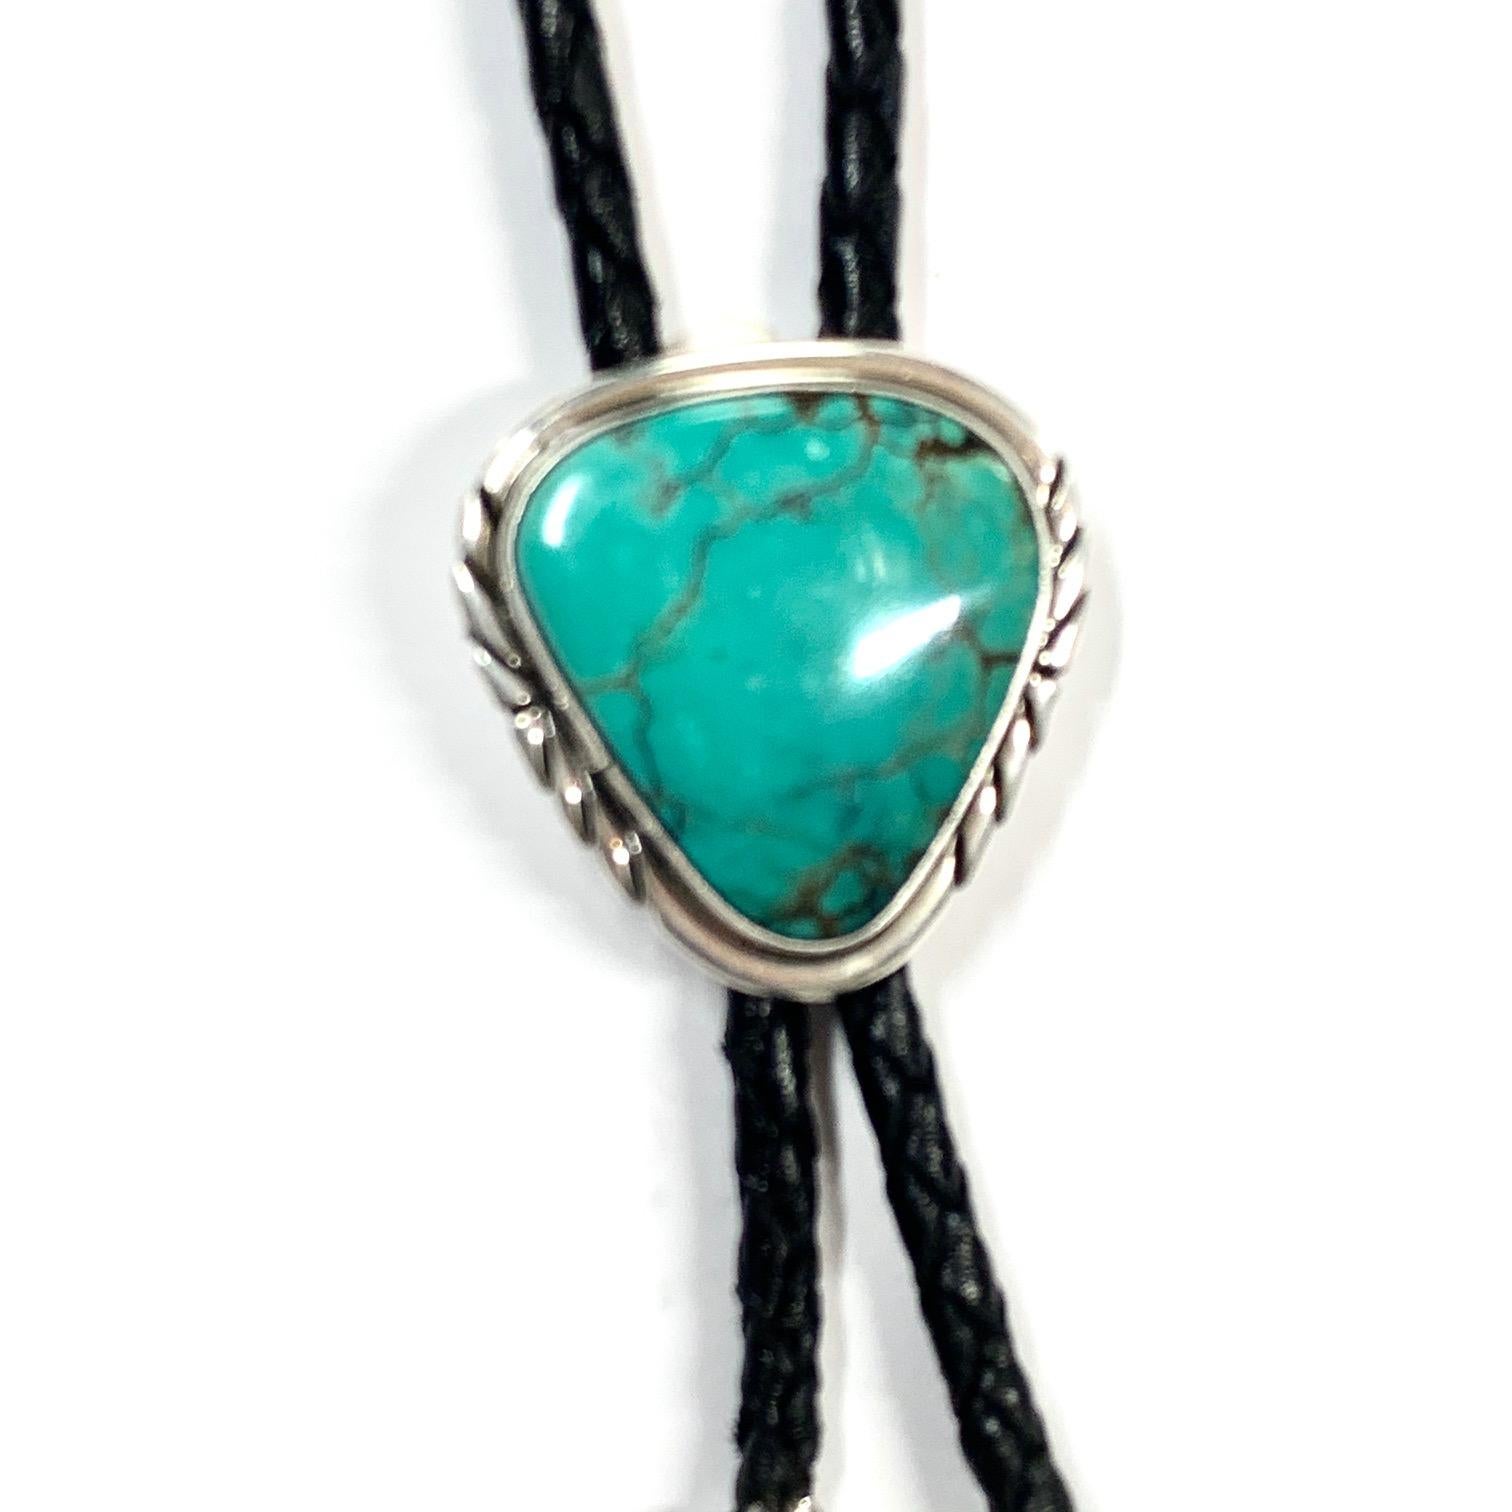 Nakai Navajo Sterling Turquoise Bolo Estate CCBOLO11

Nakai does it again, he brings to life this magnificent bolo tie crafted on 25 g of genuine silver and a gorgeous Mexican triangle cushion (30x30x36 mm) bezeled in a very symmetrical frame this